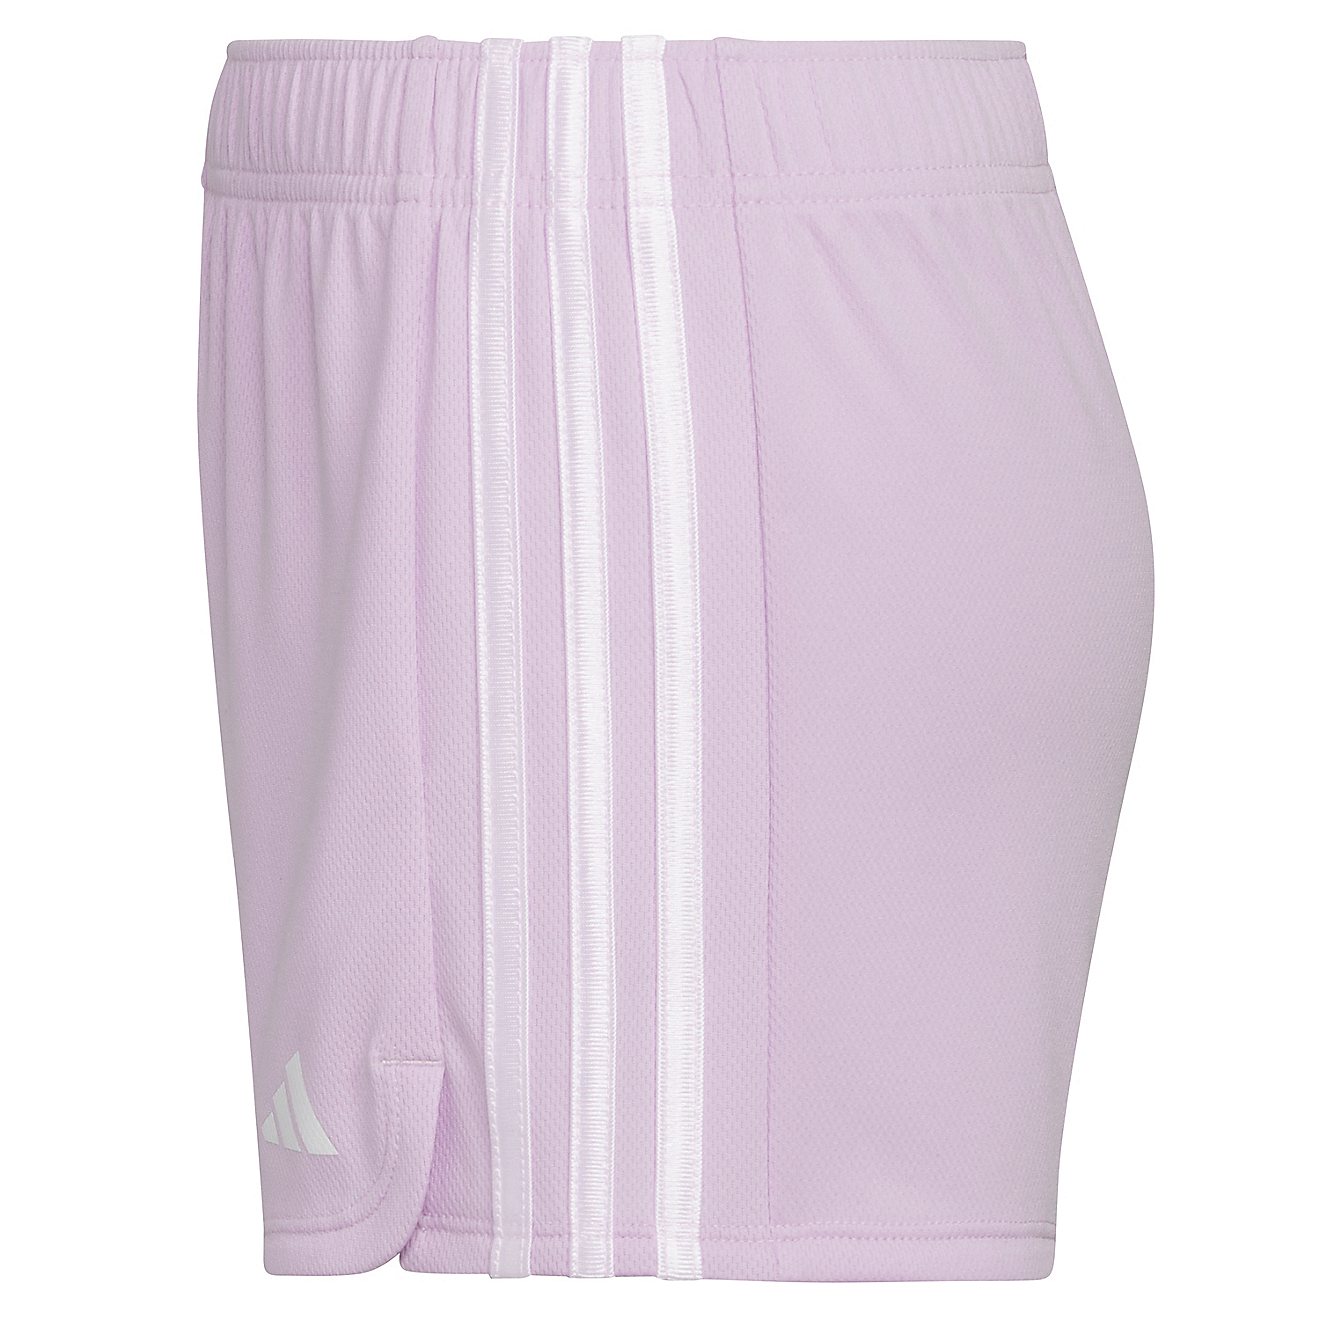 adidas Girls' AEROREADY 3-Stripes Pacer Mesh Shorts                                                                              - view number 8